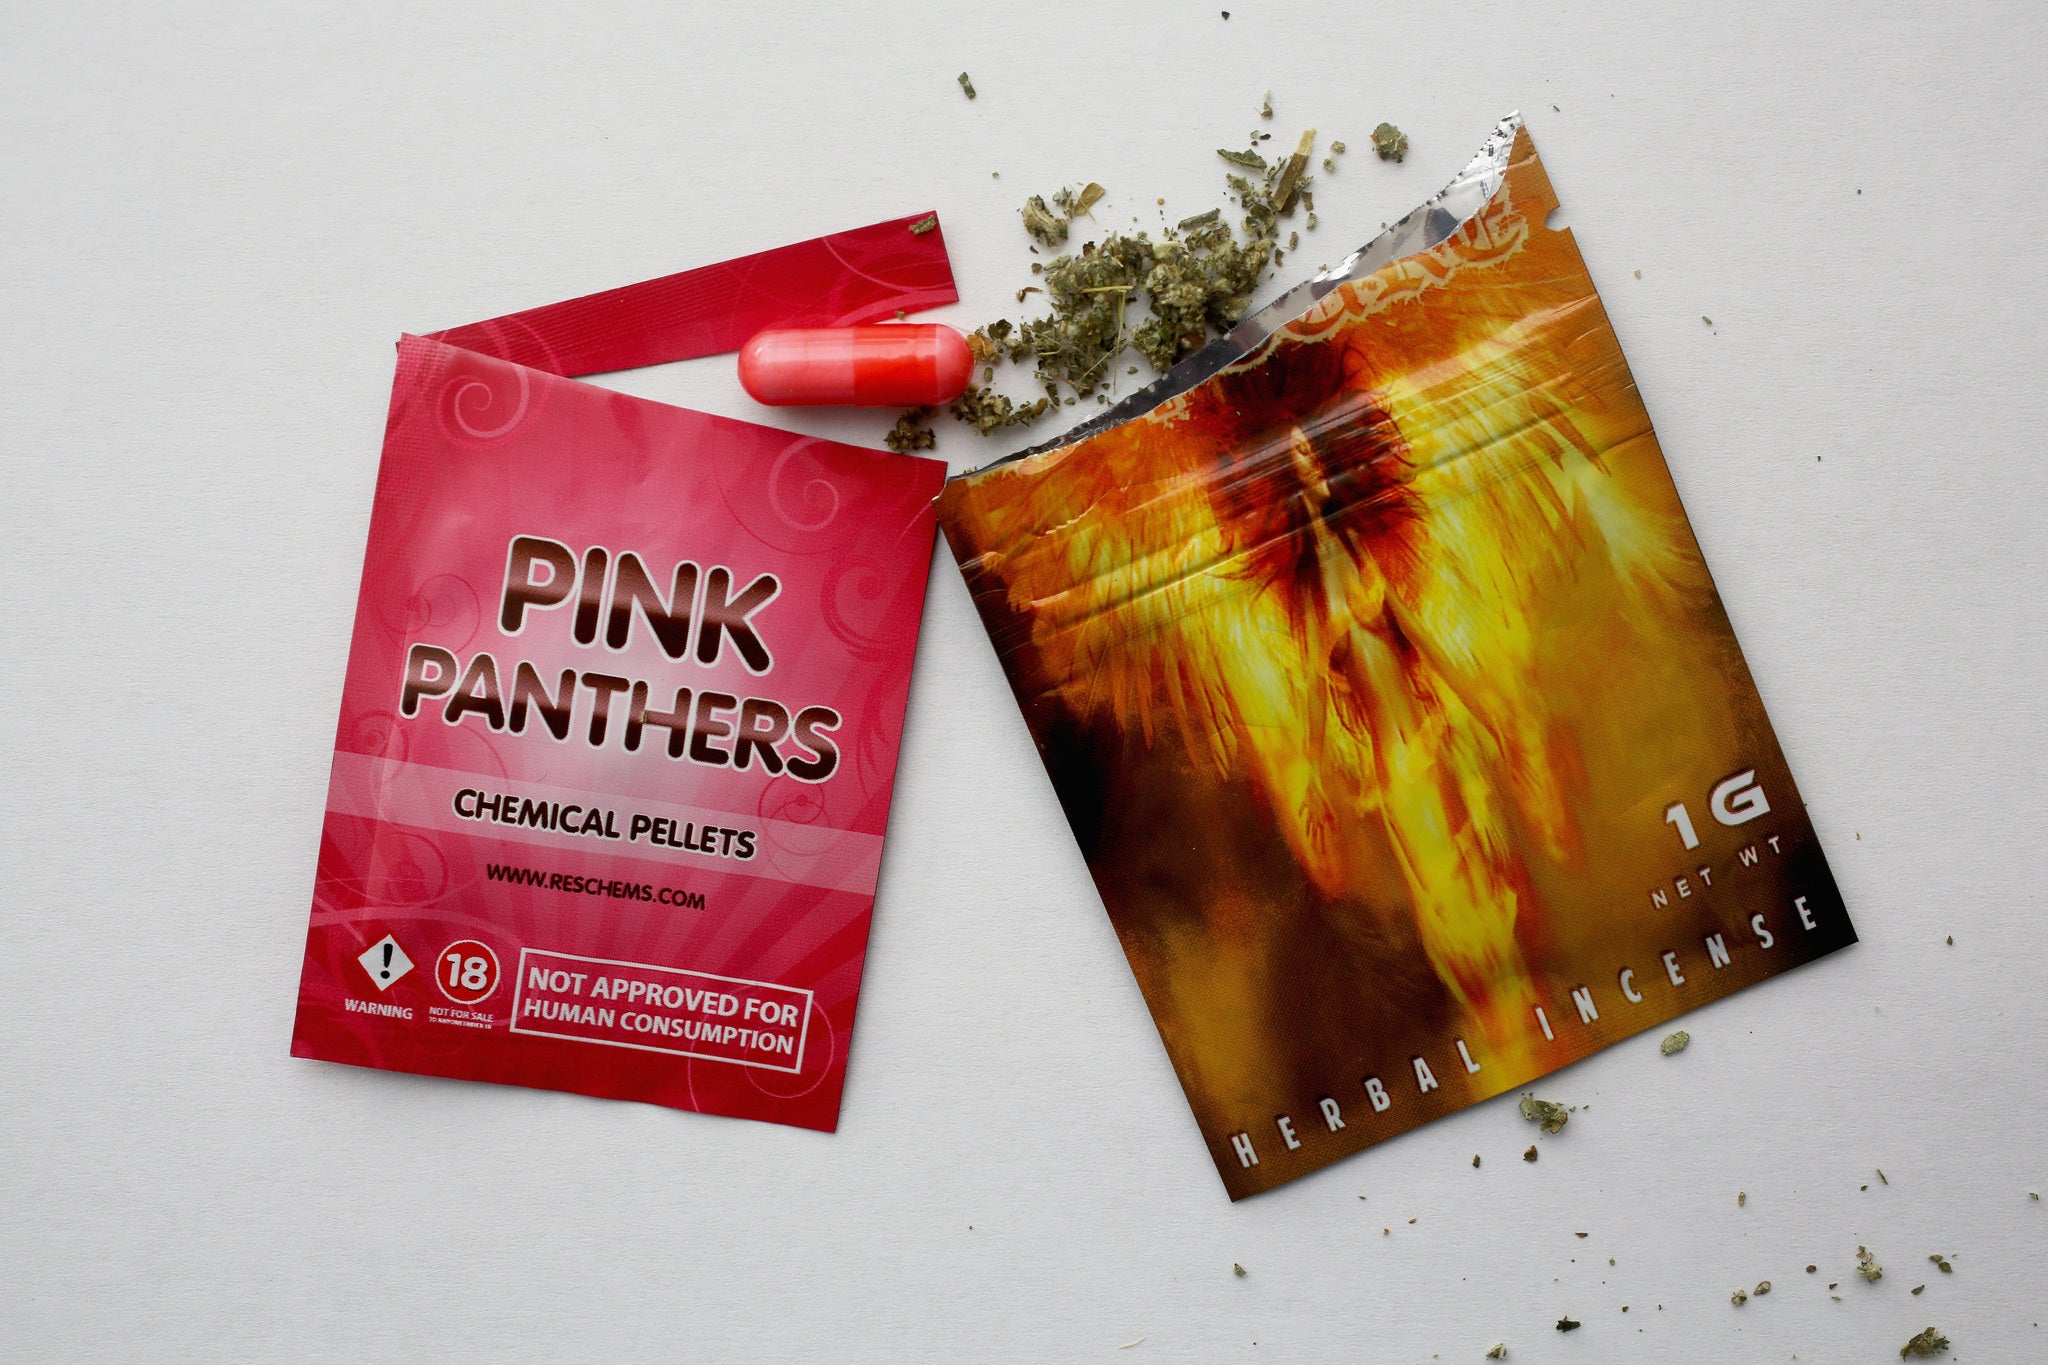 Legal highs like these would be banned if the government's Psychoactive Substances Bill comes into effect